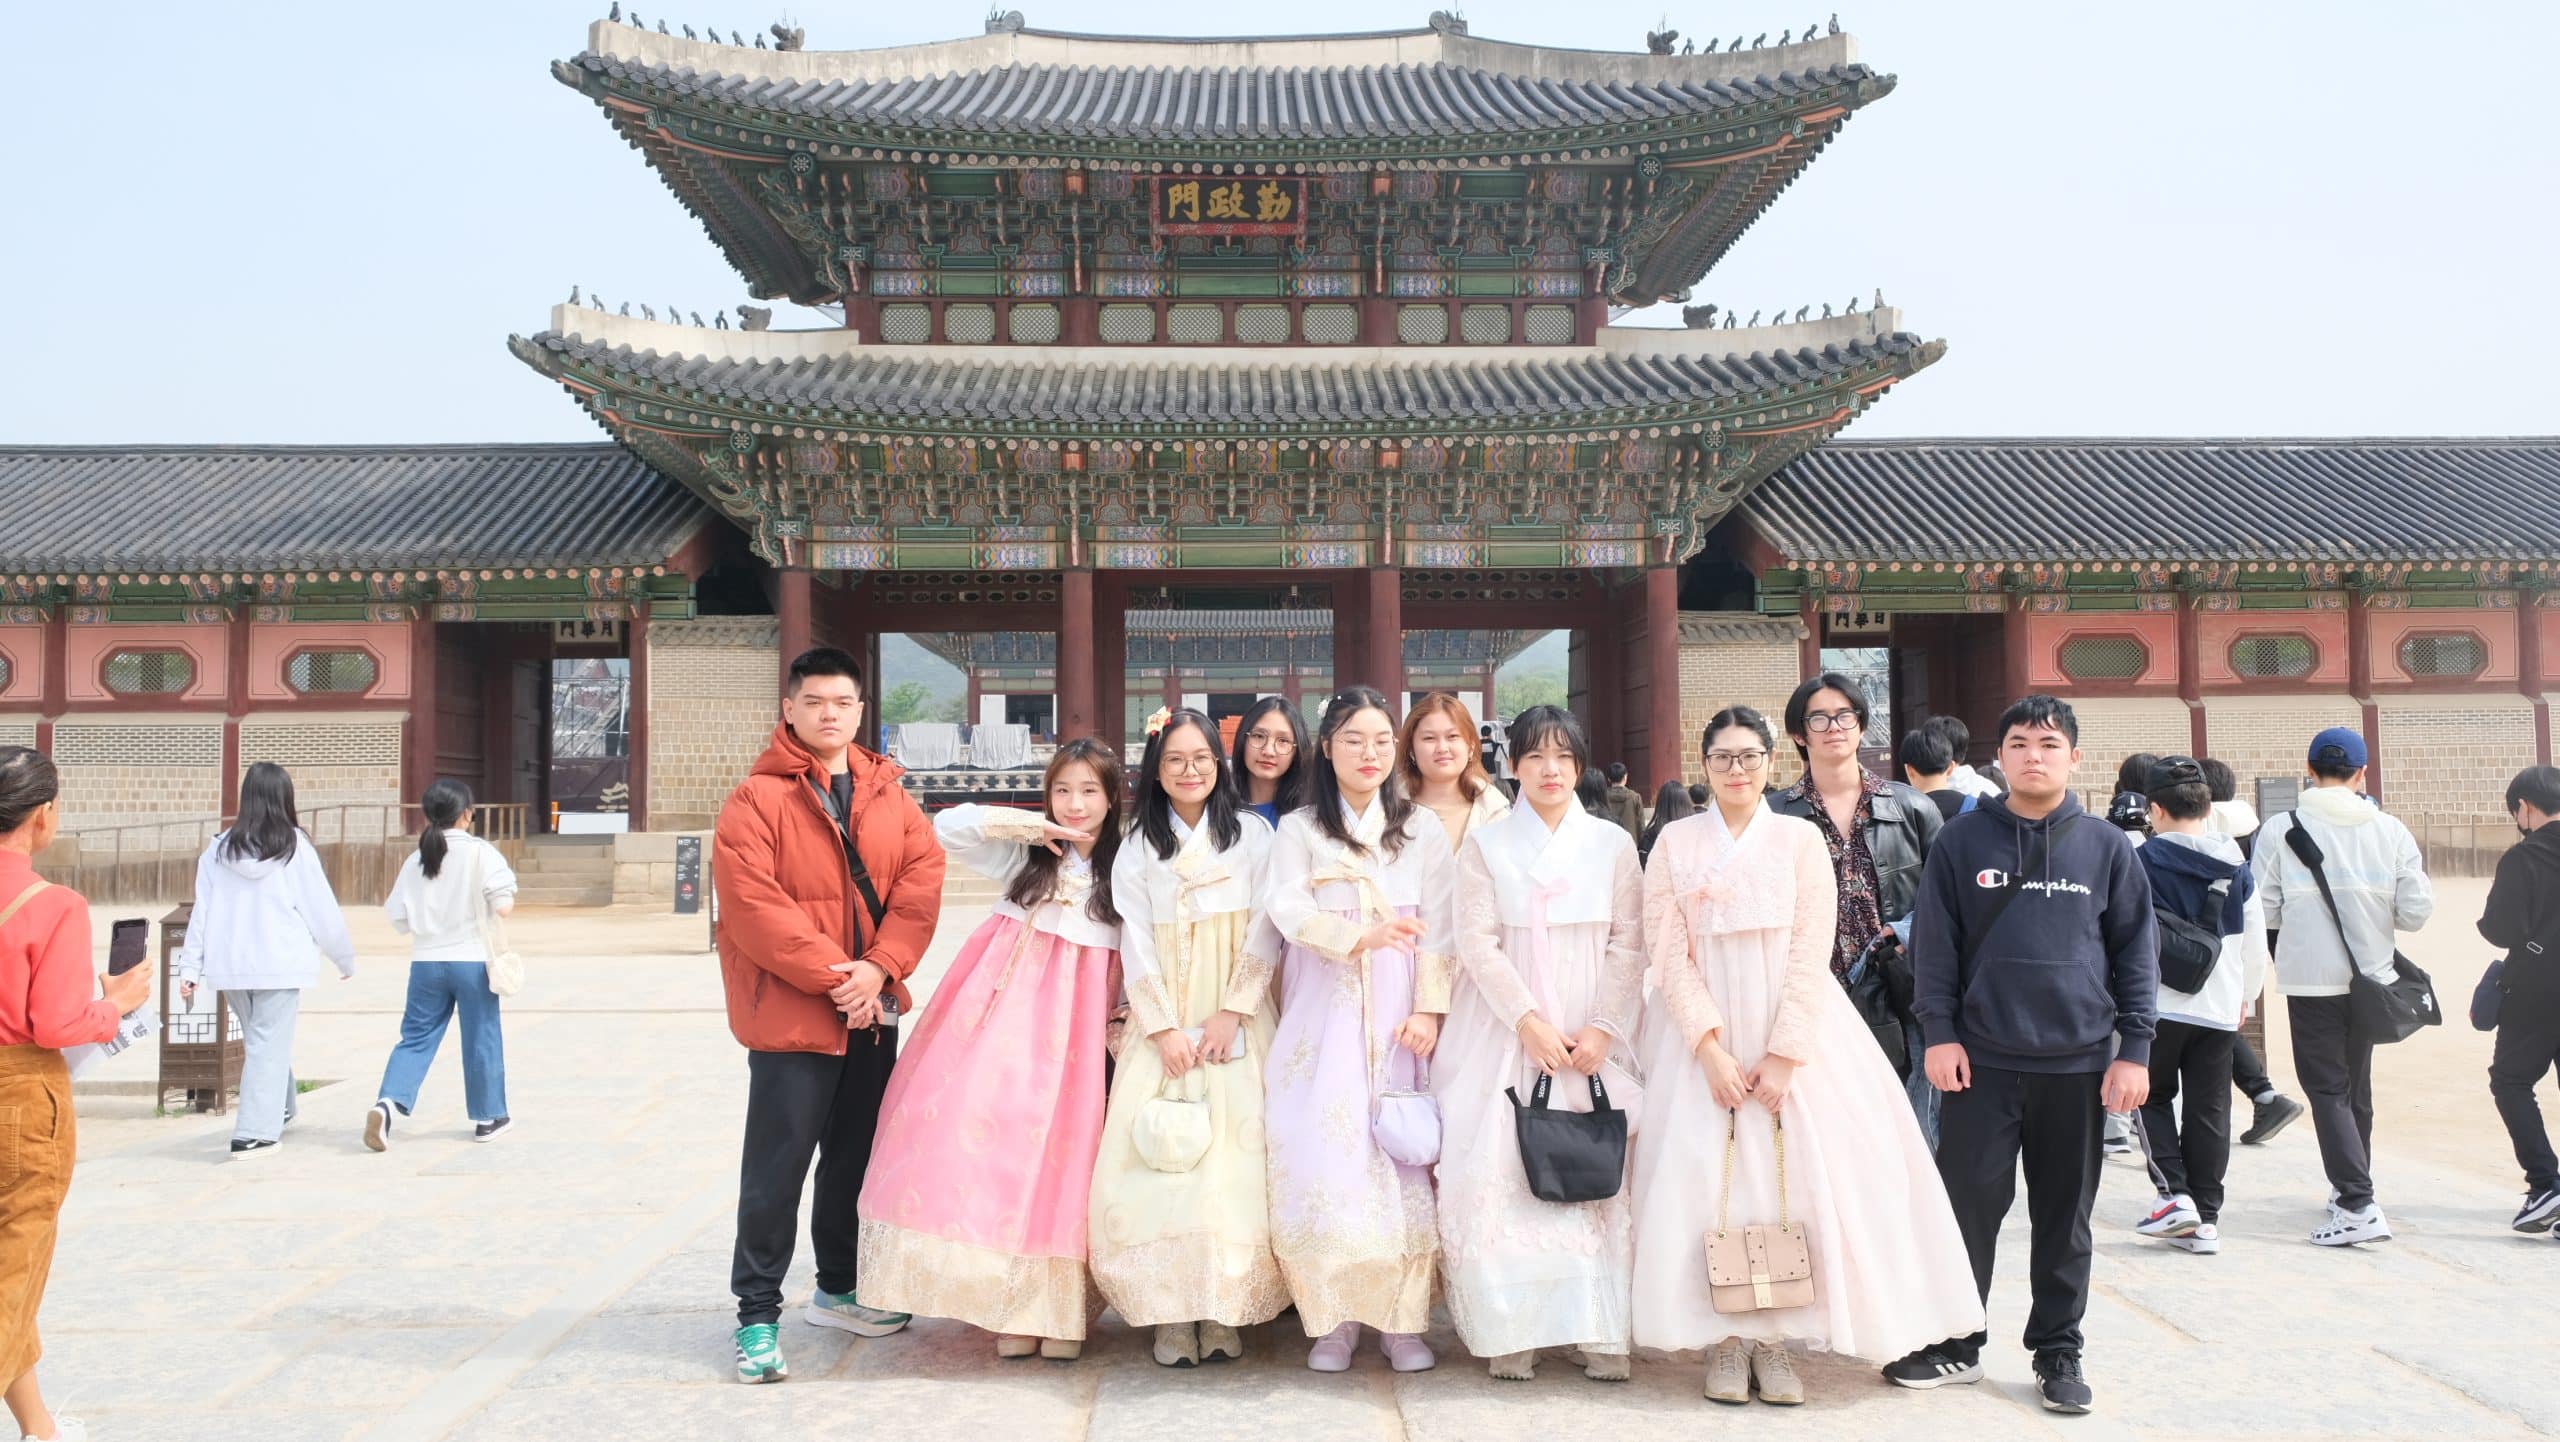 BUV students joined a journey of learning and exploration with 7-day trip to South Korea